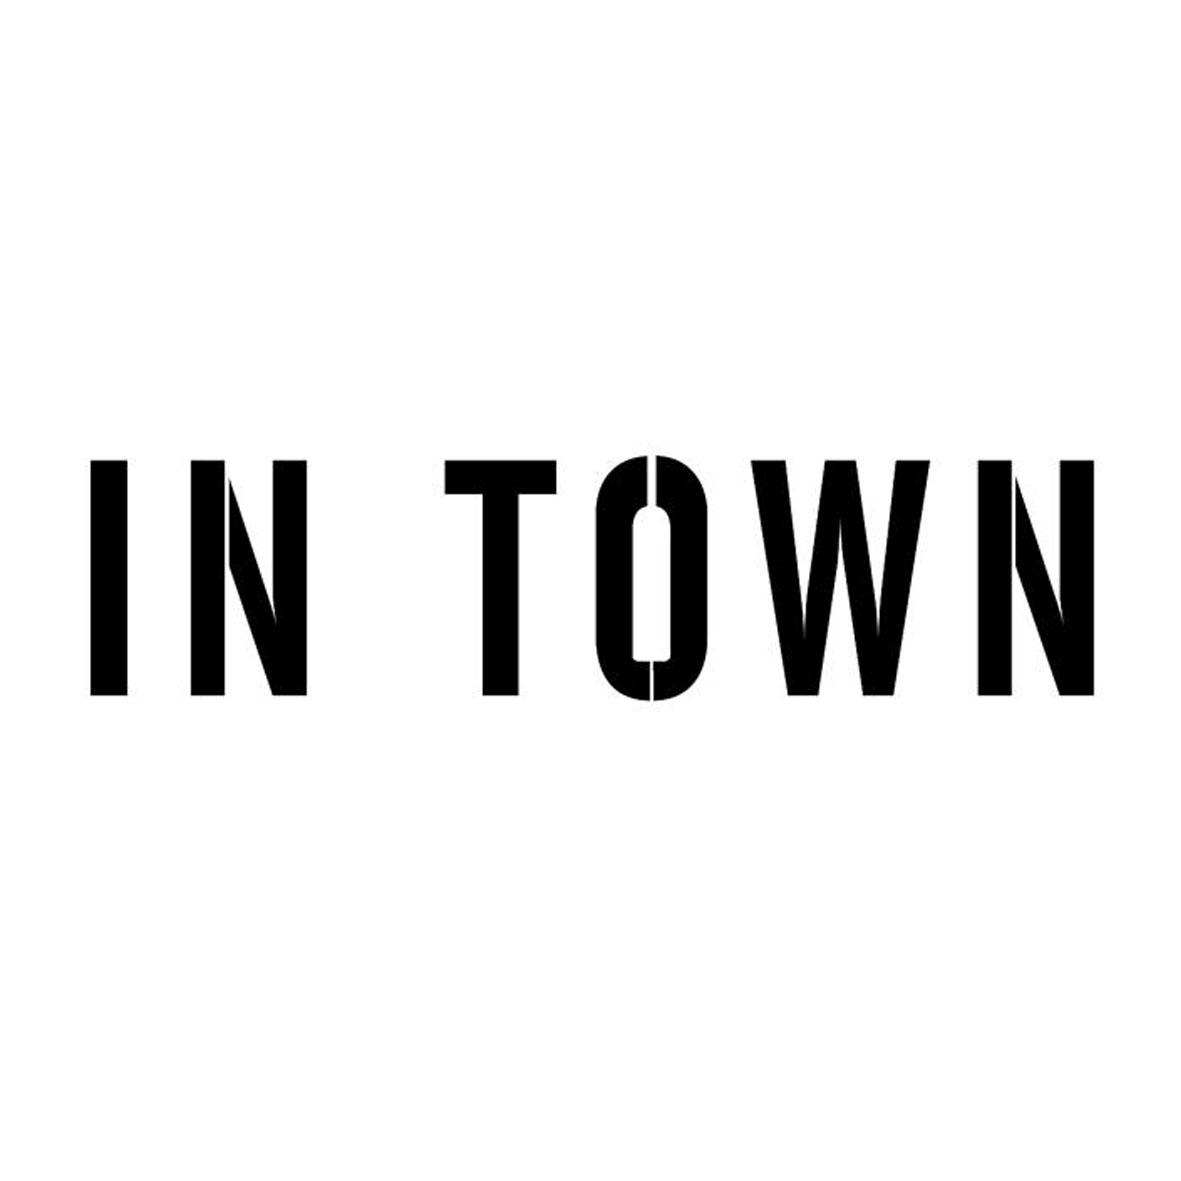 intown